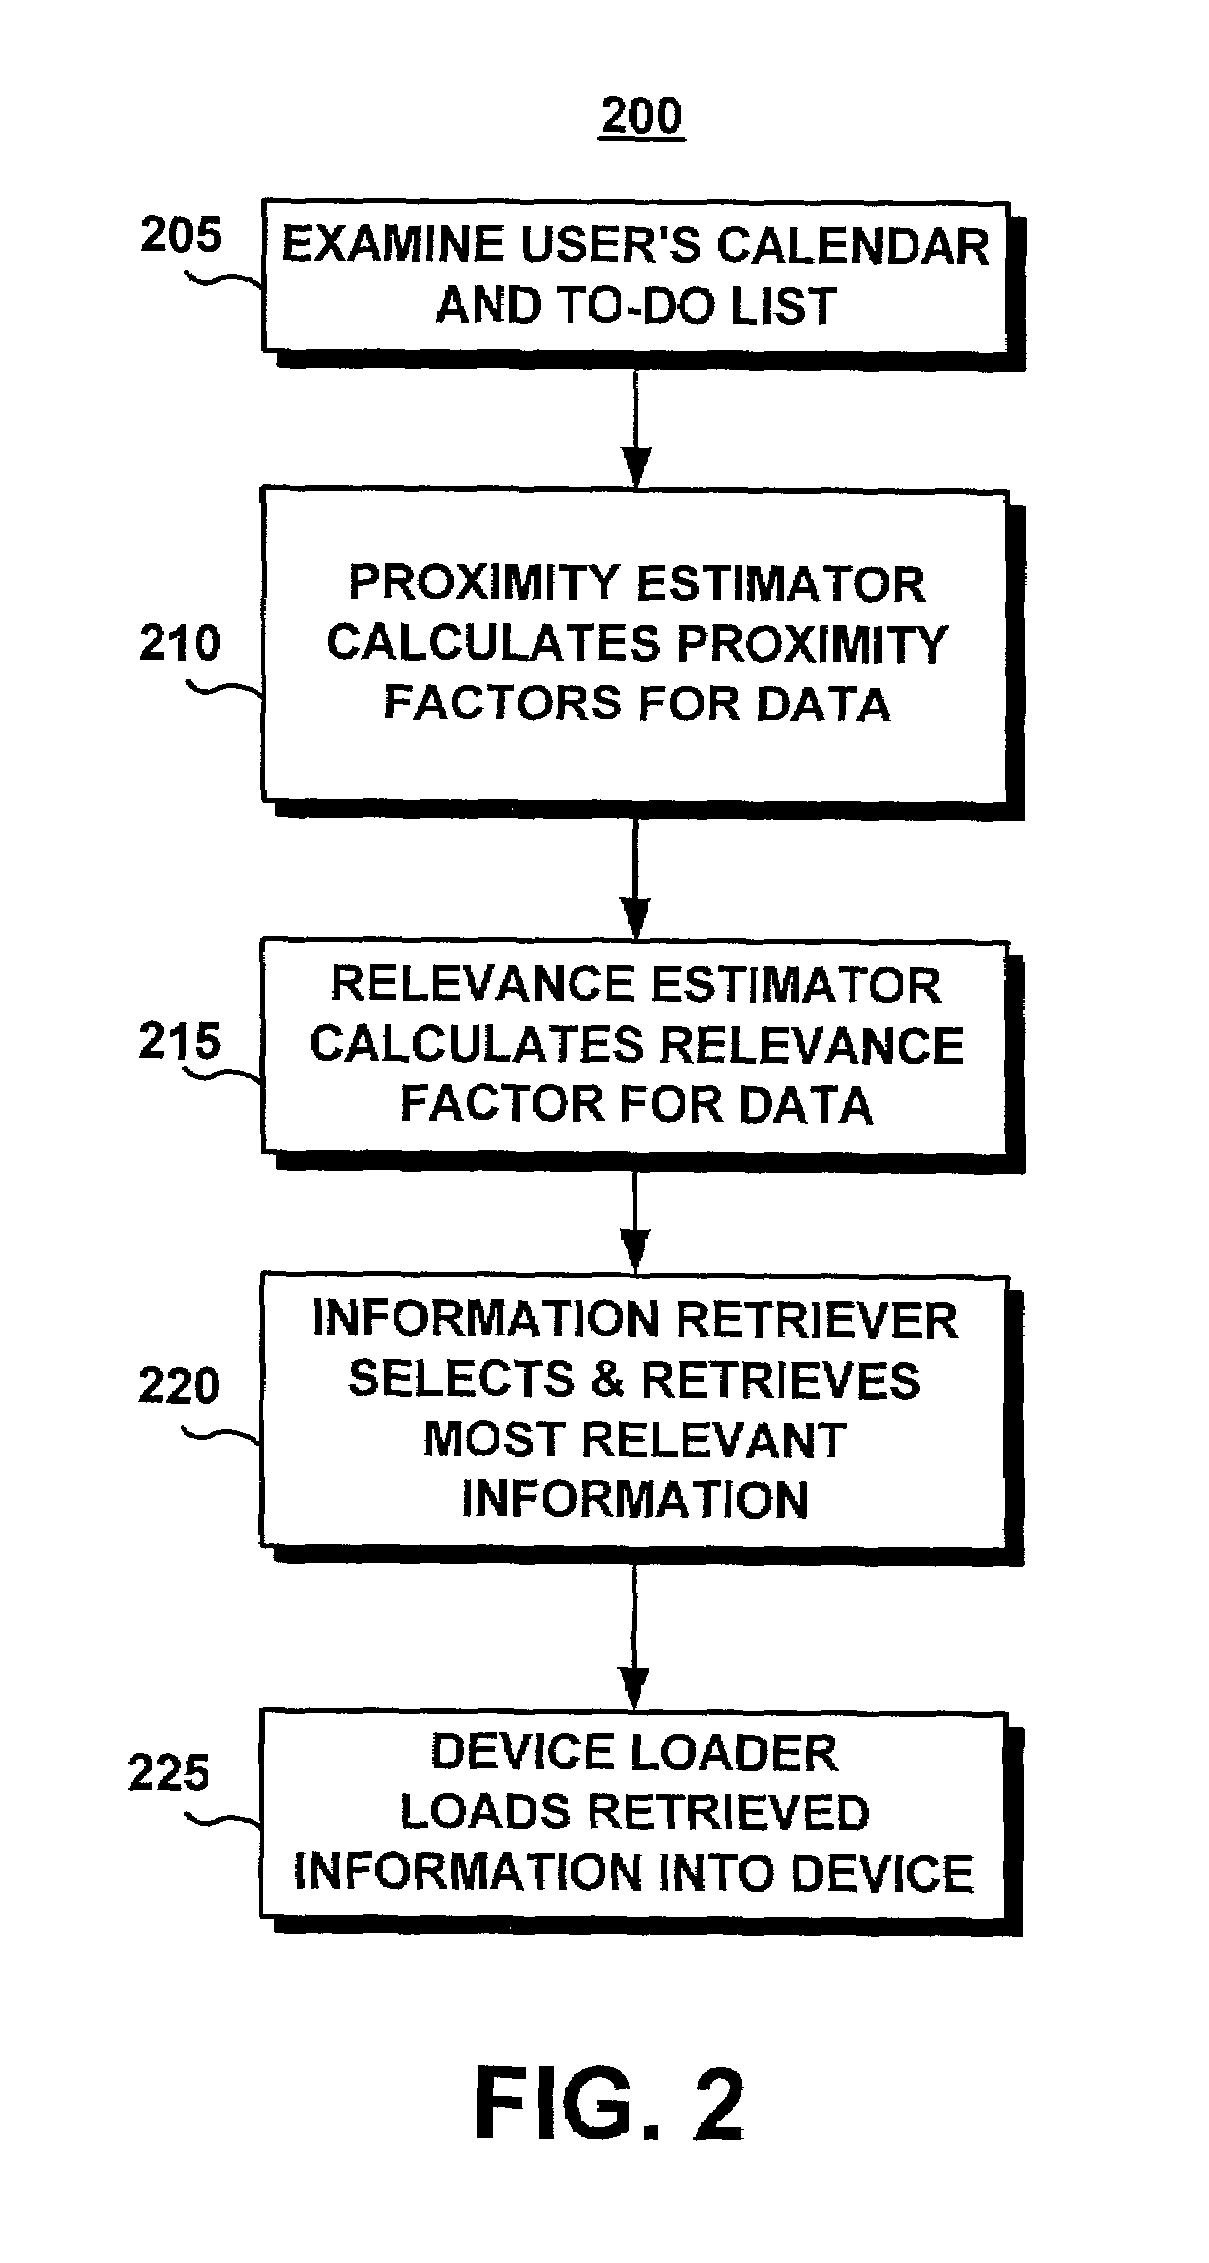 Automatic relevance-based preloading of relevant information in portable devices